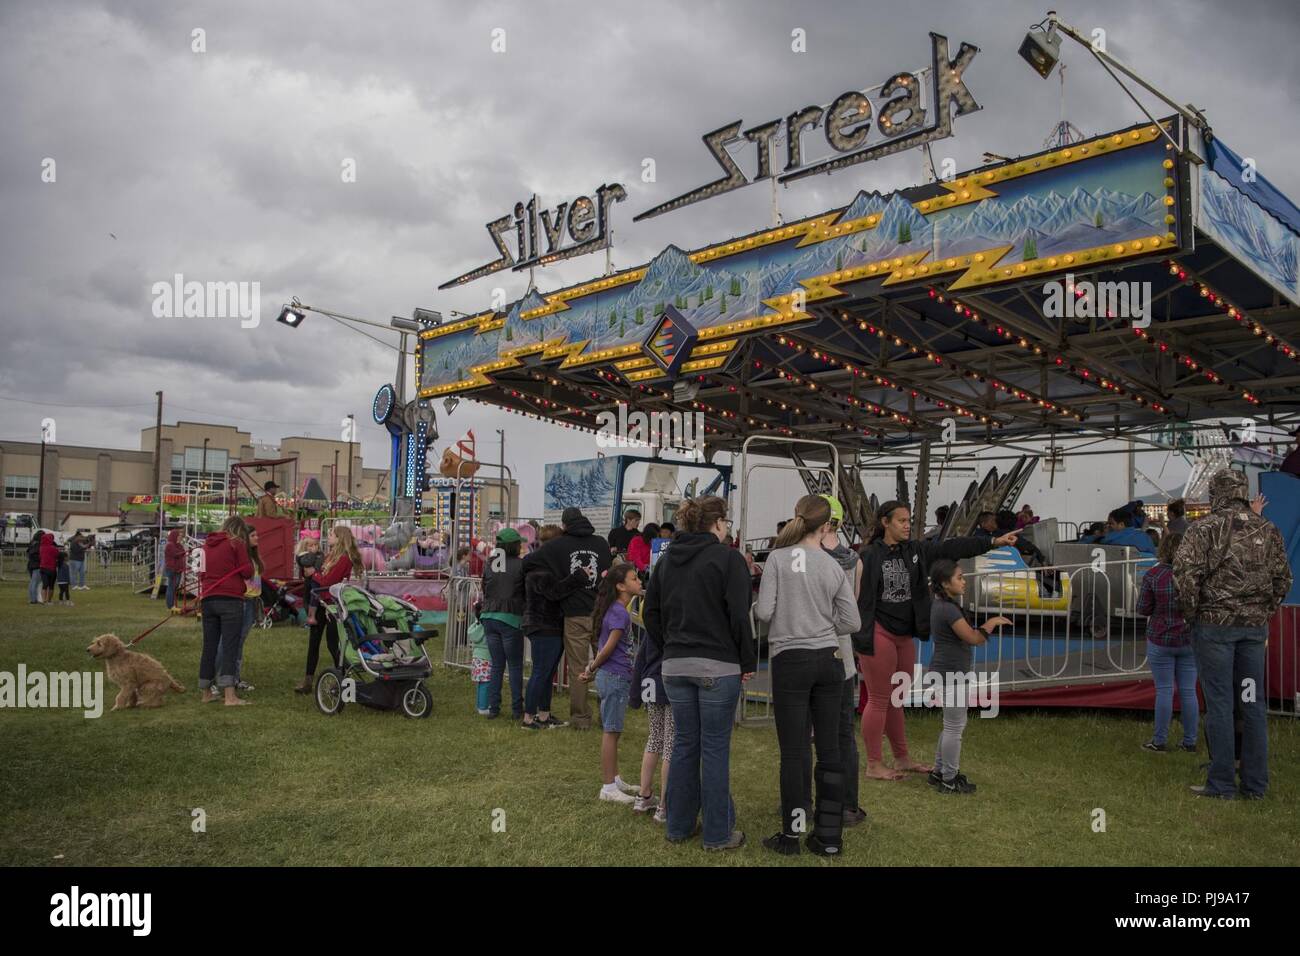 Participants wait in line for an amusement ride during the 3rd annual Summer Fest hosted by the 673d Force Support Squadron at Joint Base Elmendorf-Richardson, Alaska, July 8, 2018. The event was open to anyone with base access and offered free activities such as carnival rides, a petting zoo, face painting, a bungee trampoline, and carnival games. Stock Photo